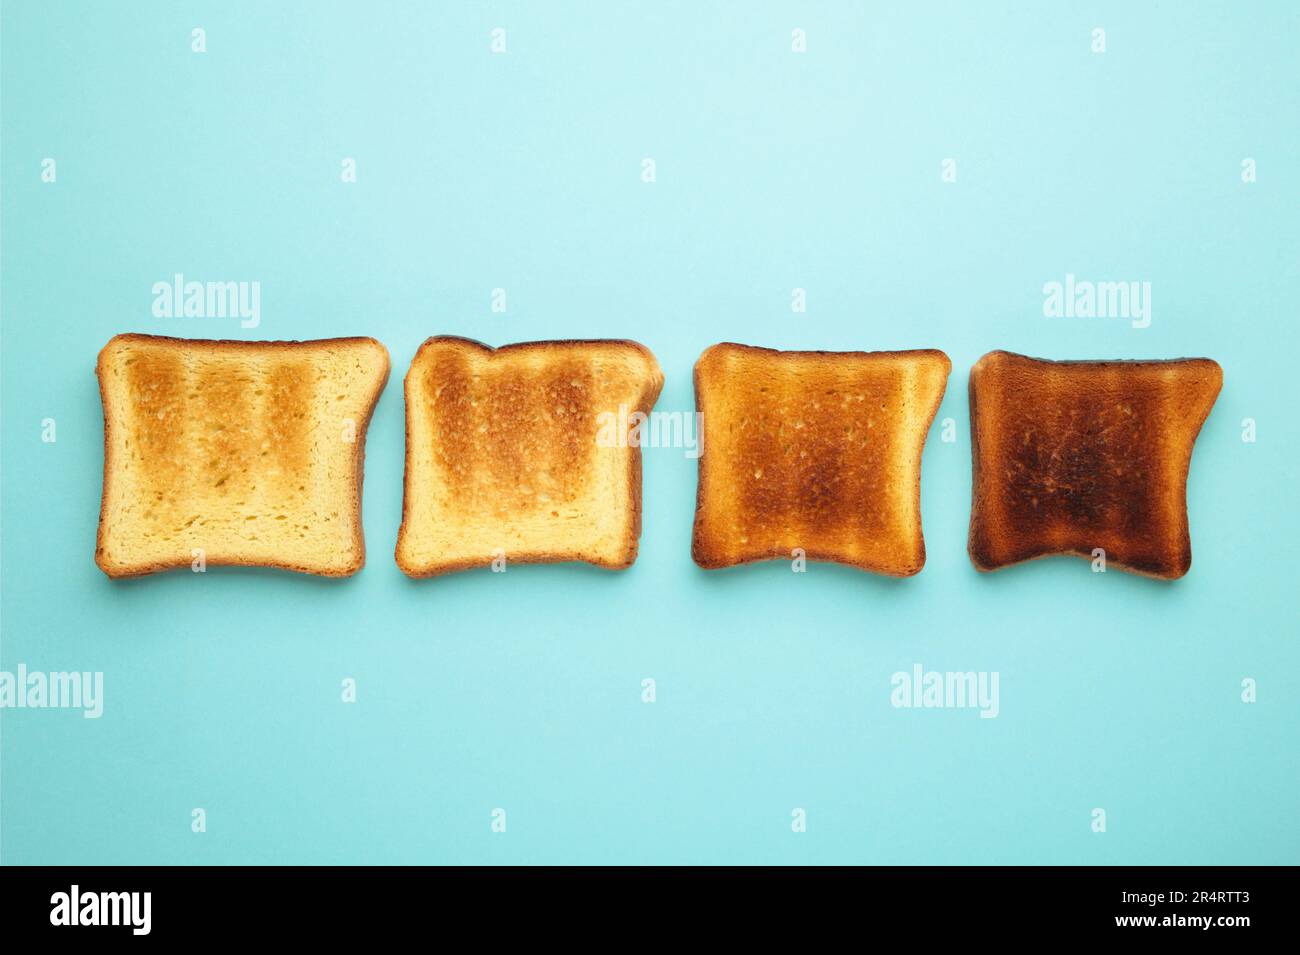 Slices Of Toast Bread On Light Blue Wooden Table, Top View Stock